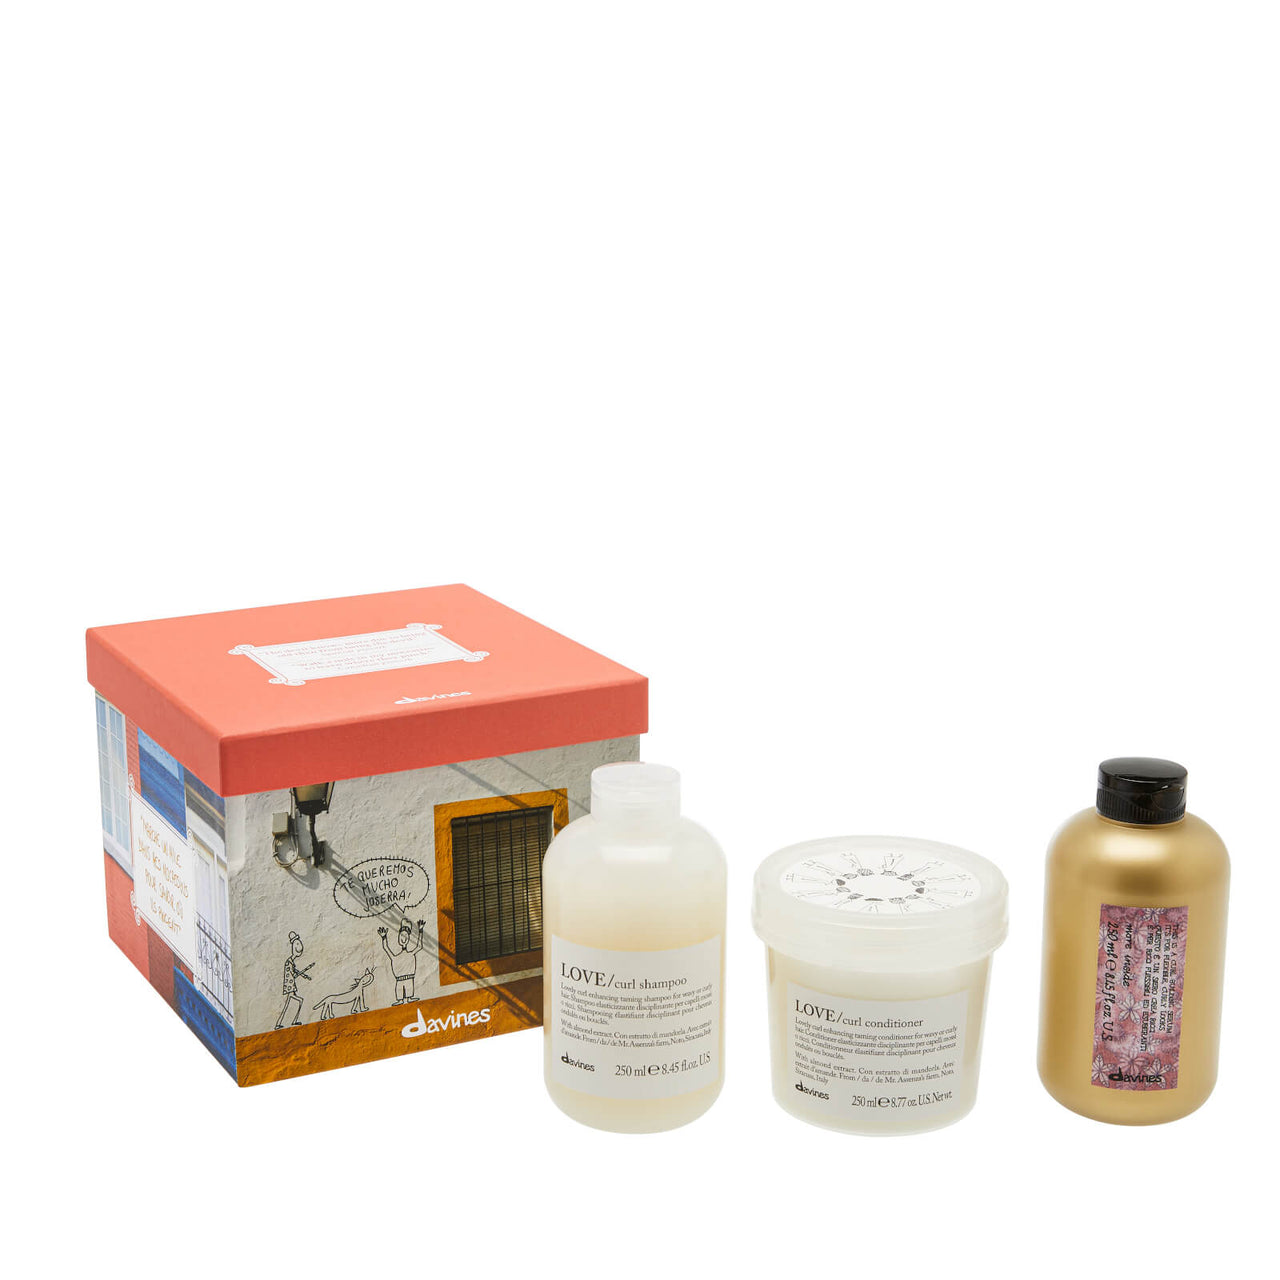 Davines Gift Set with Love Curl for Curly Hair